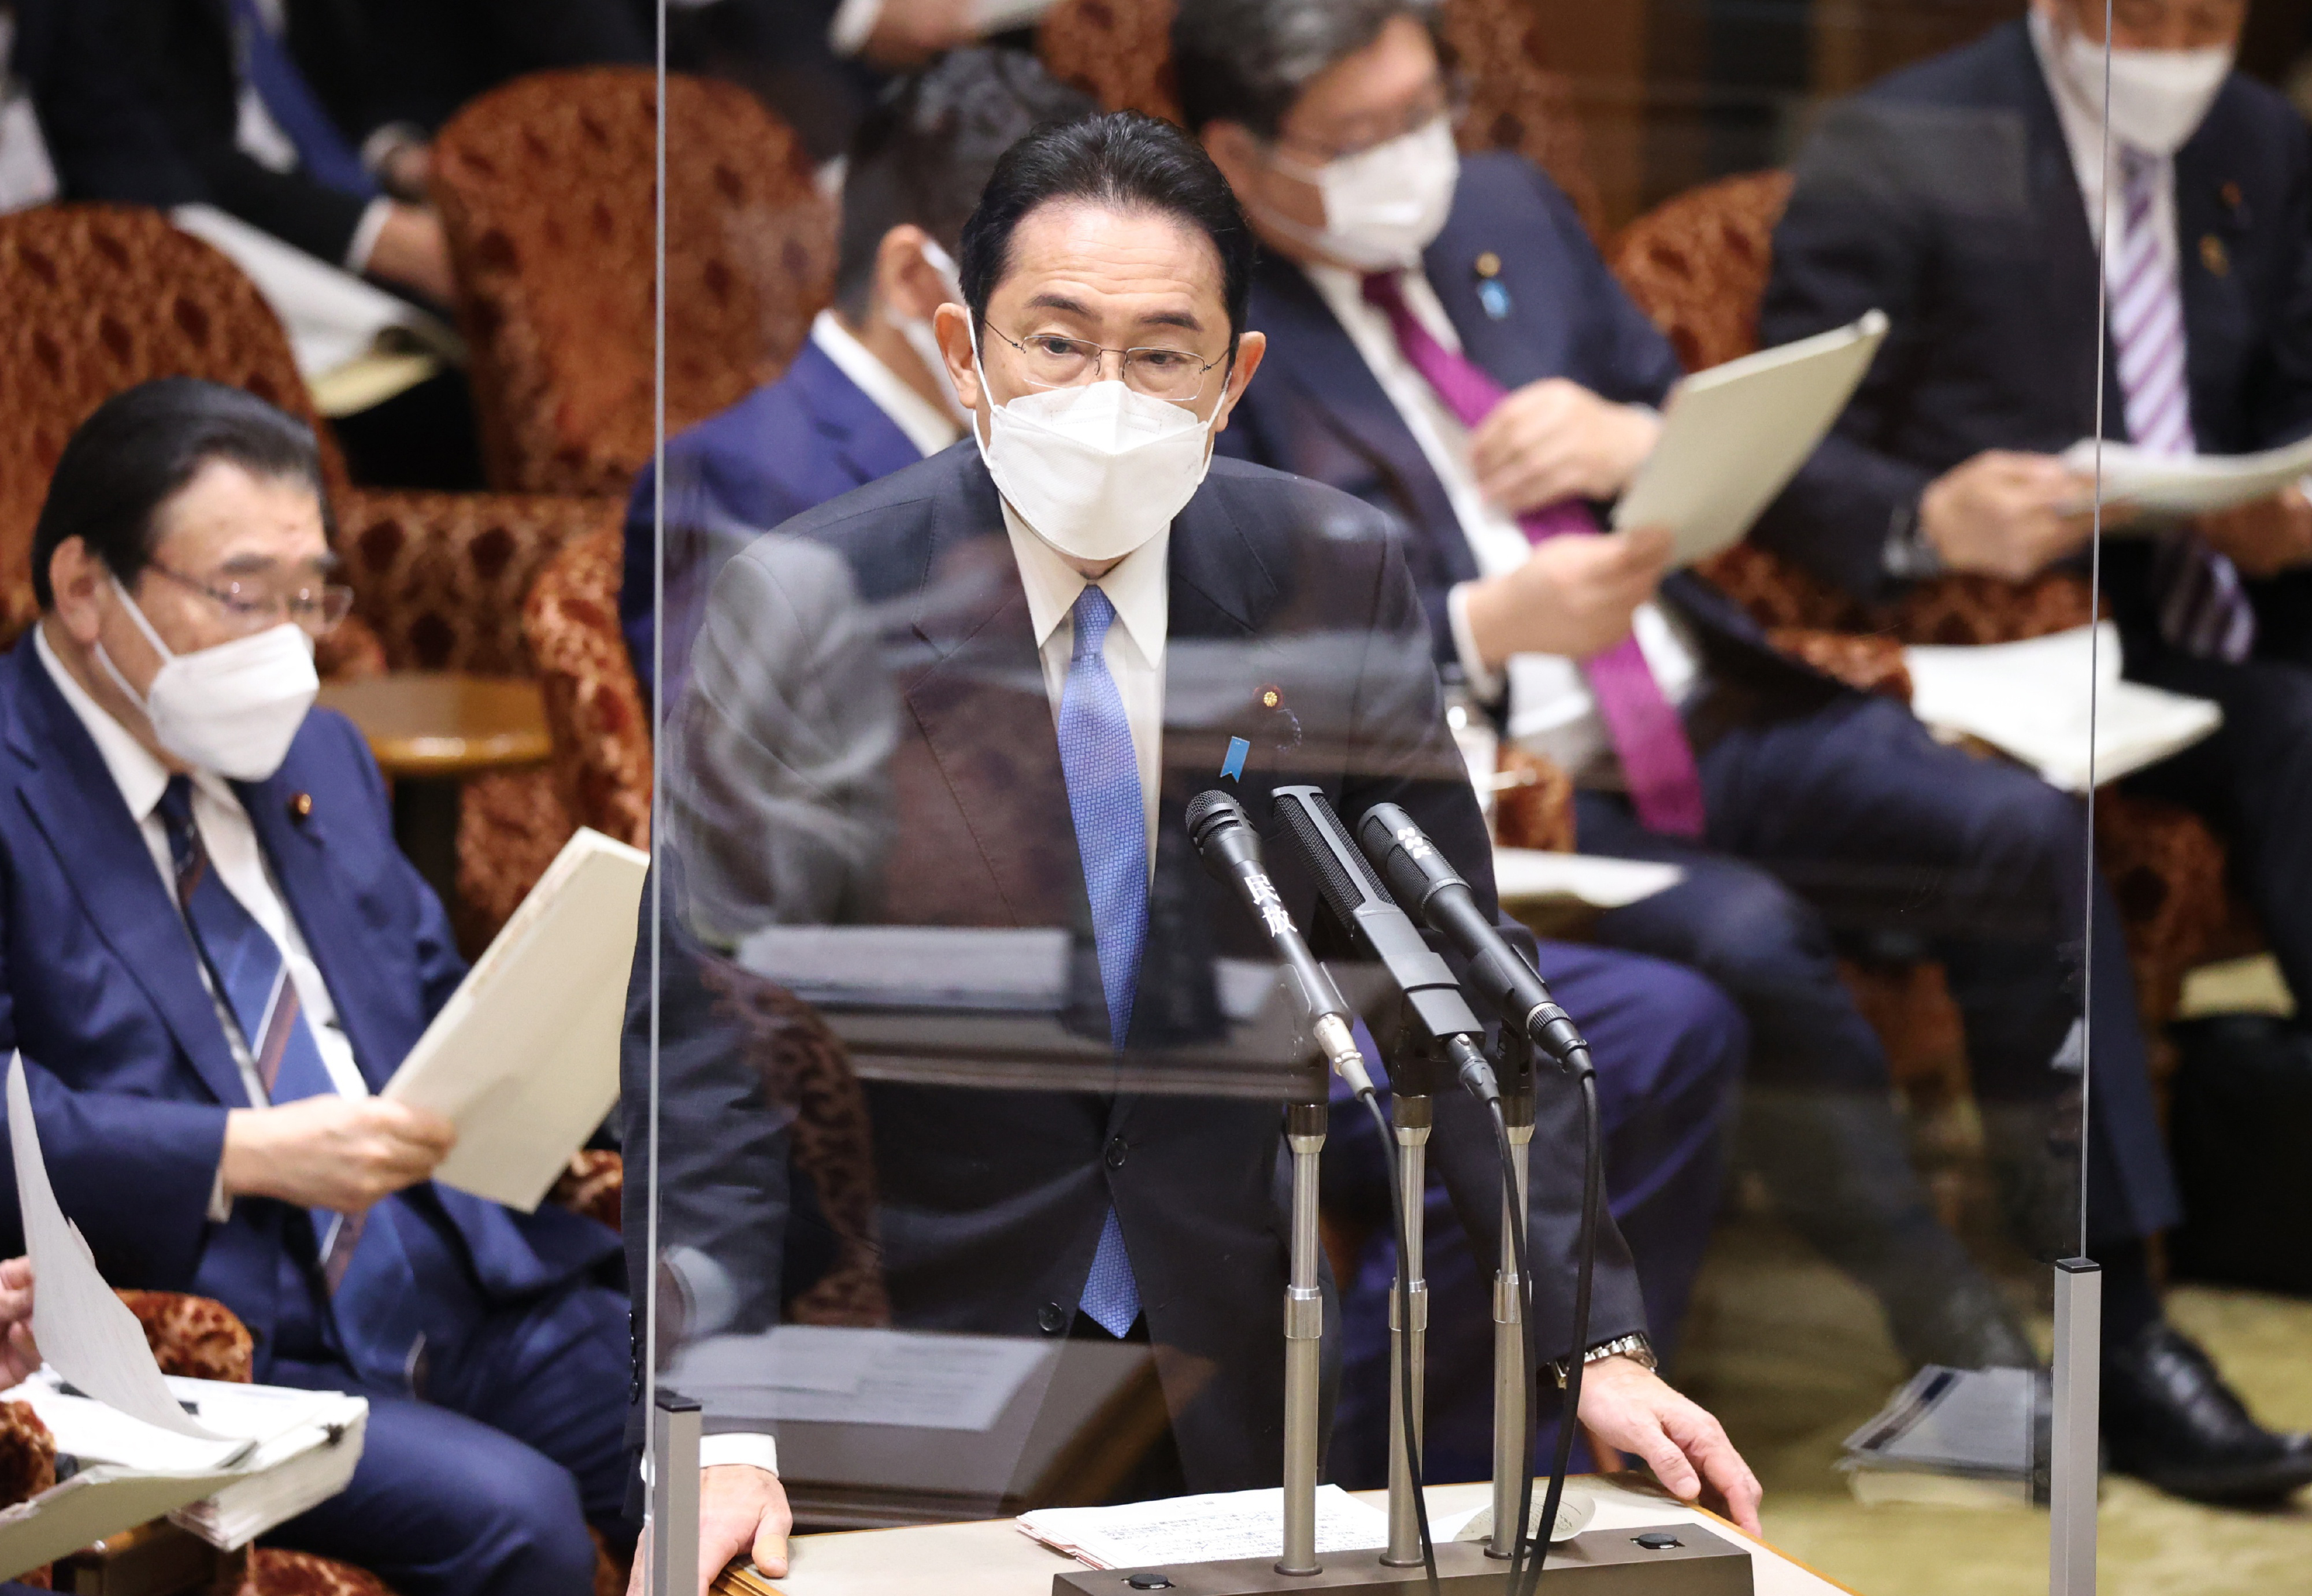 Prime Minister Fumio Kishida speaks at the Budget Committee of the House of Councillors in Tokyo, Japan, on February 28.